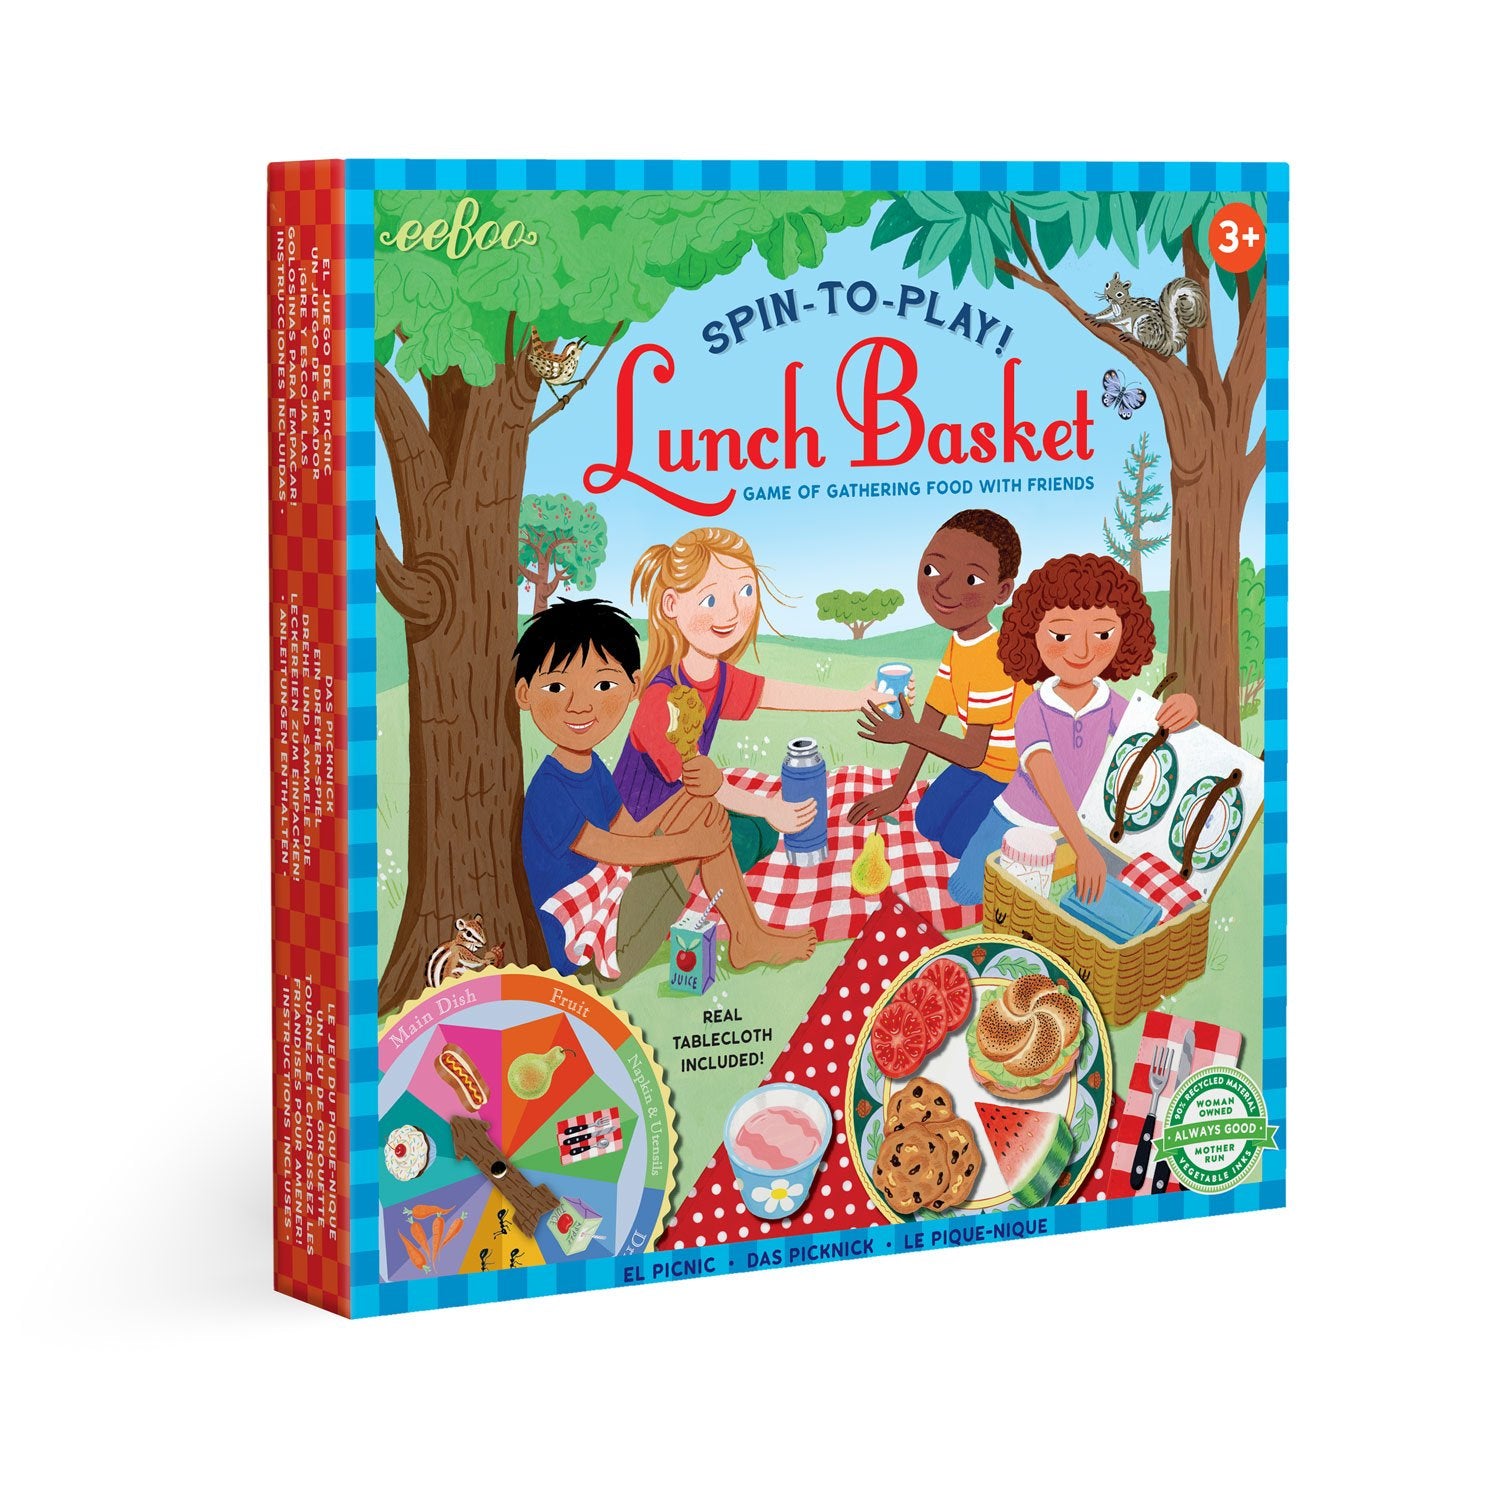 Lunch Basket - Spin To Play Game of Gathering Food With Friends    